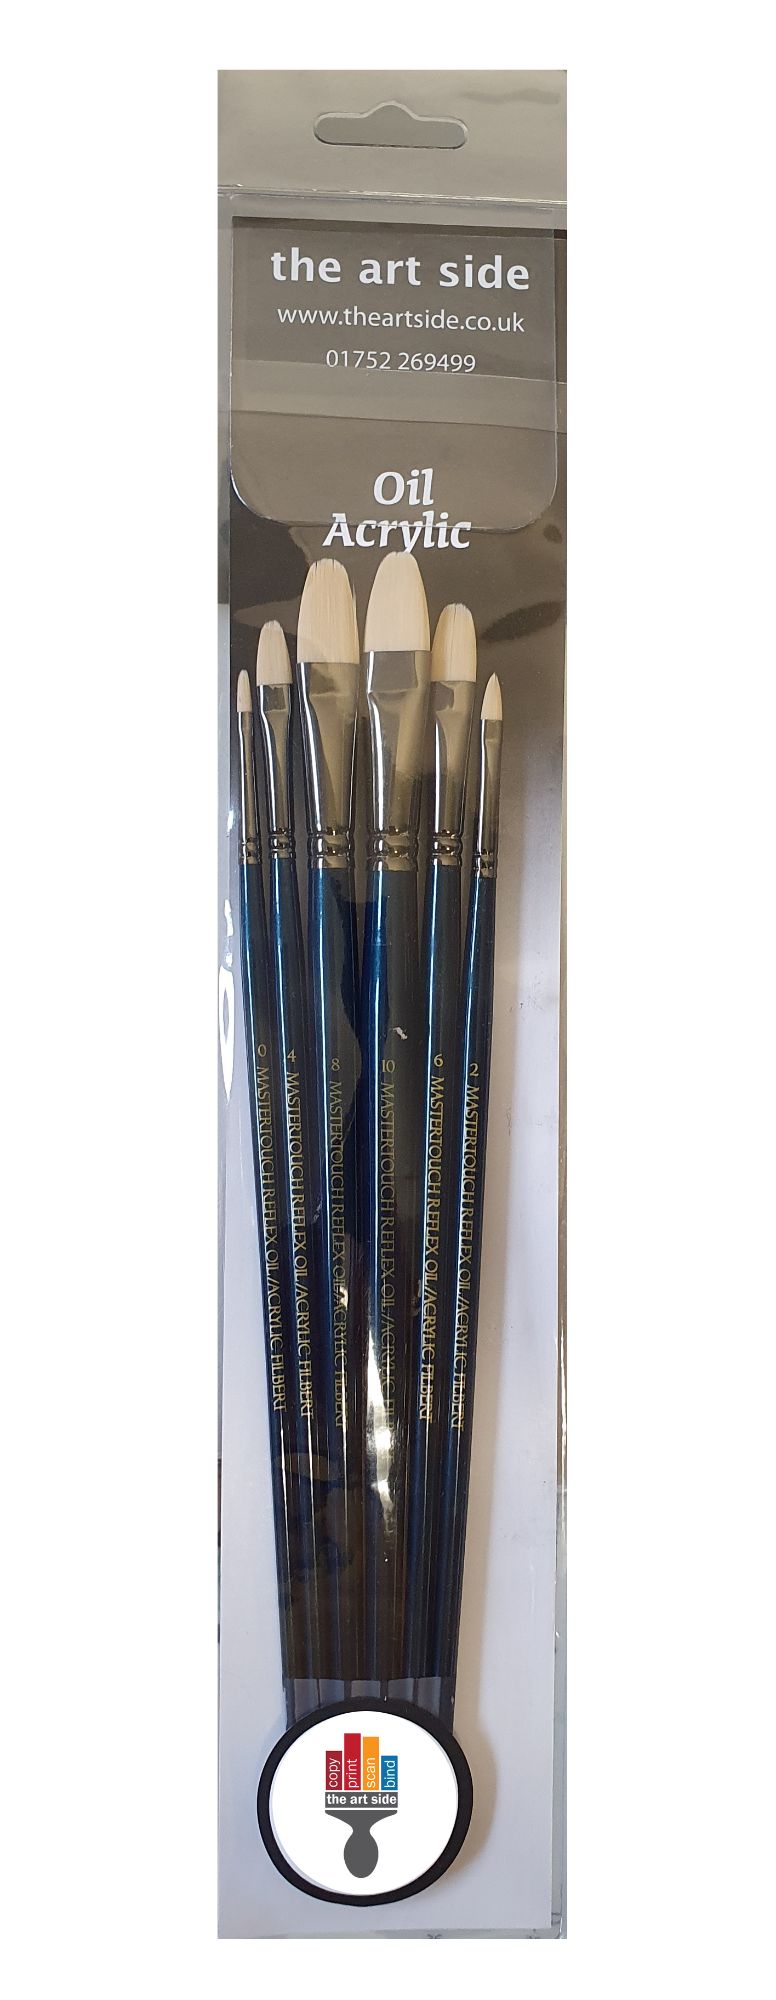 Pro Arte Mastertouch Artists 6 Brush Set FILBERTS. For Acrylic & Oil Paint